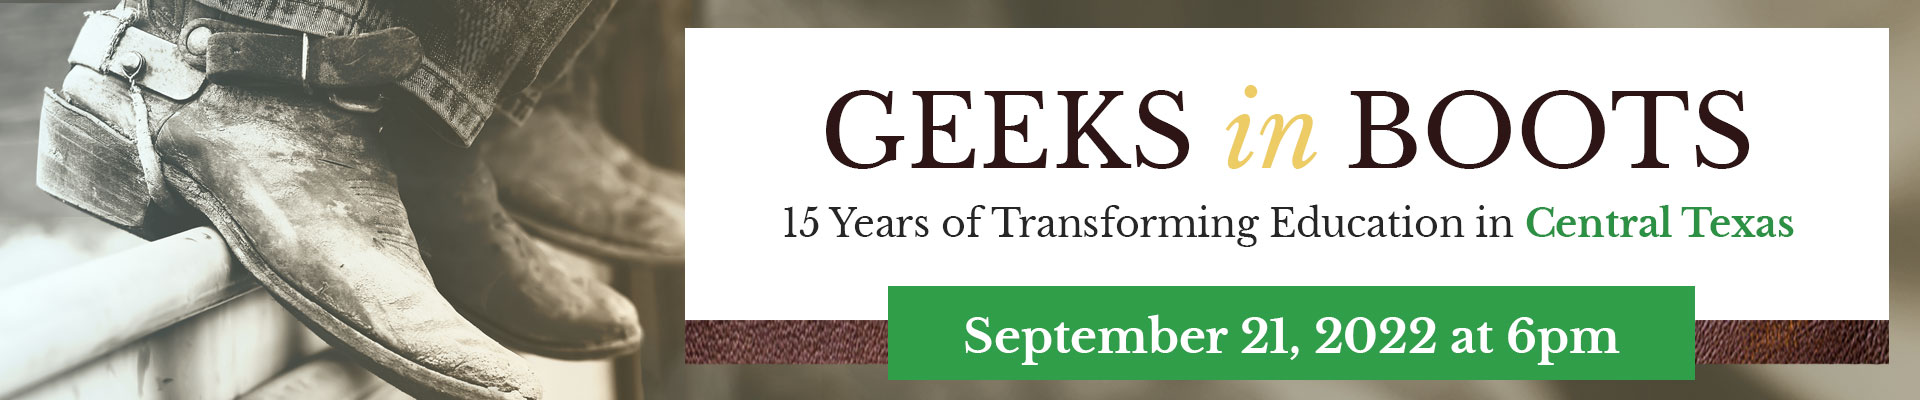 Geeks in Boots 15 Years of Transforming Education in Central Texas November 3, 2021